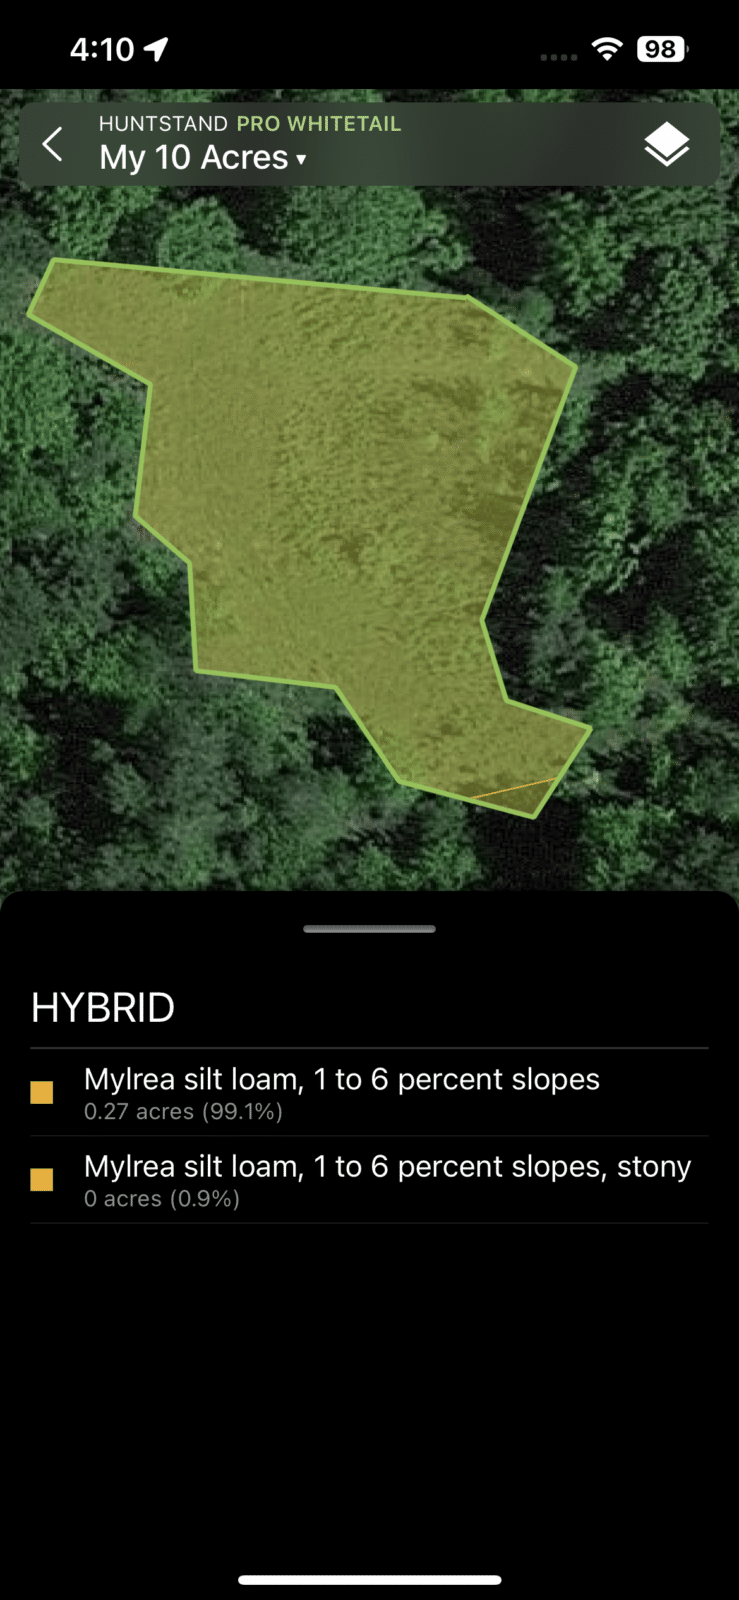 Saving the shape as a food plot allows you to click on the shape and view soil info for the area.